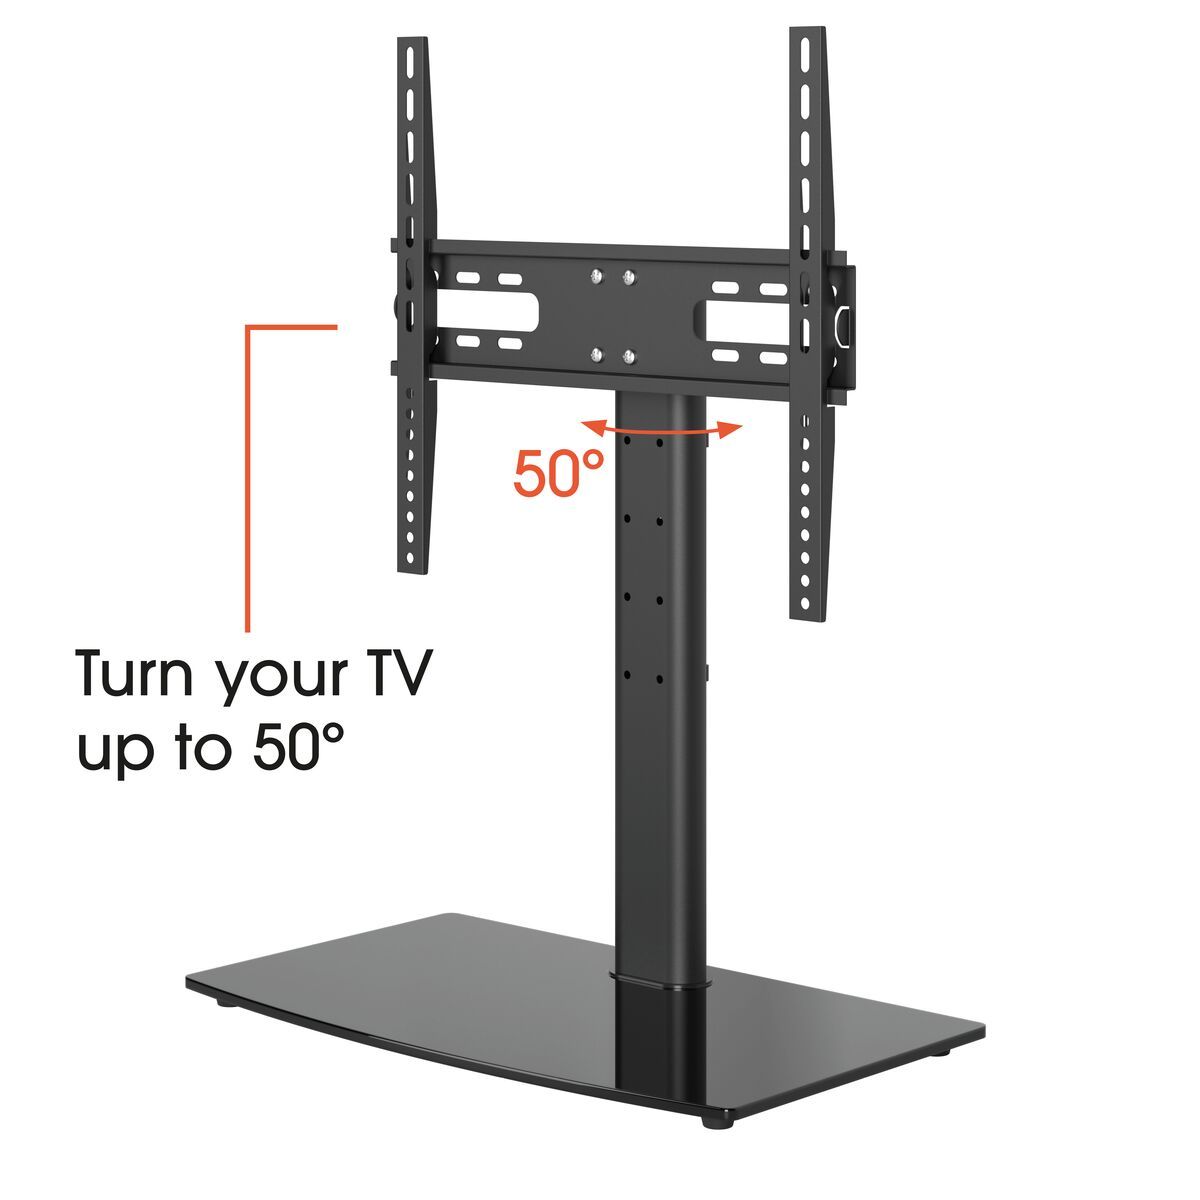 Vogel's MS3085 Tabletop TV stand - Suitable for 32 up to 65 inch TVs - USP